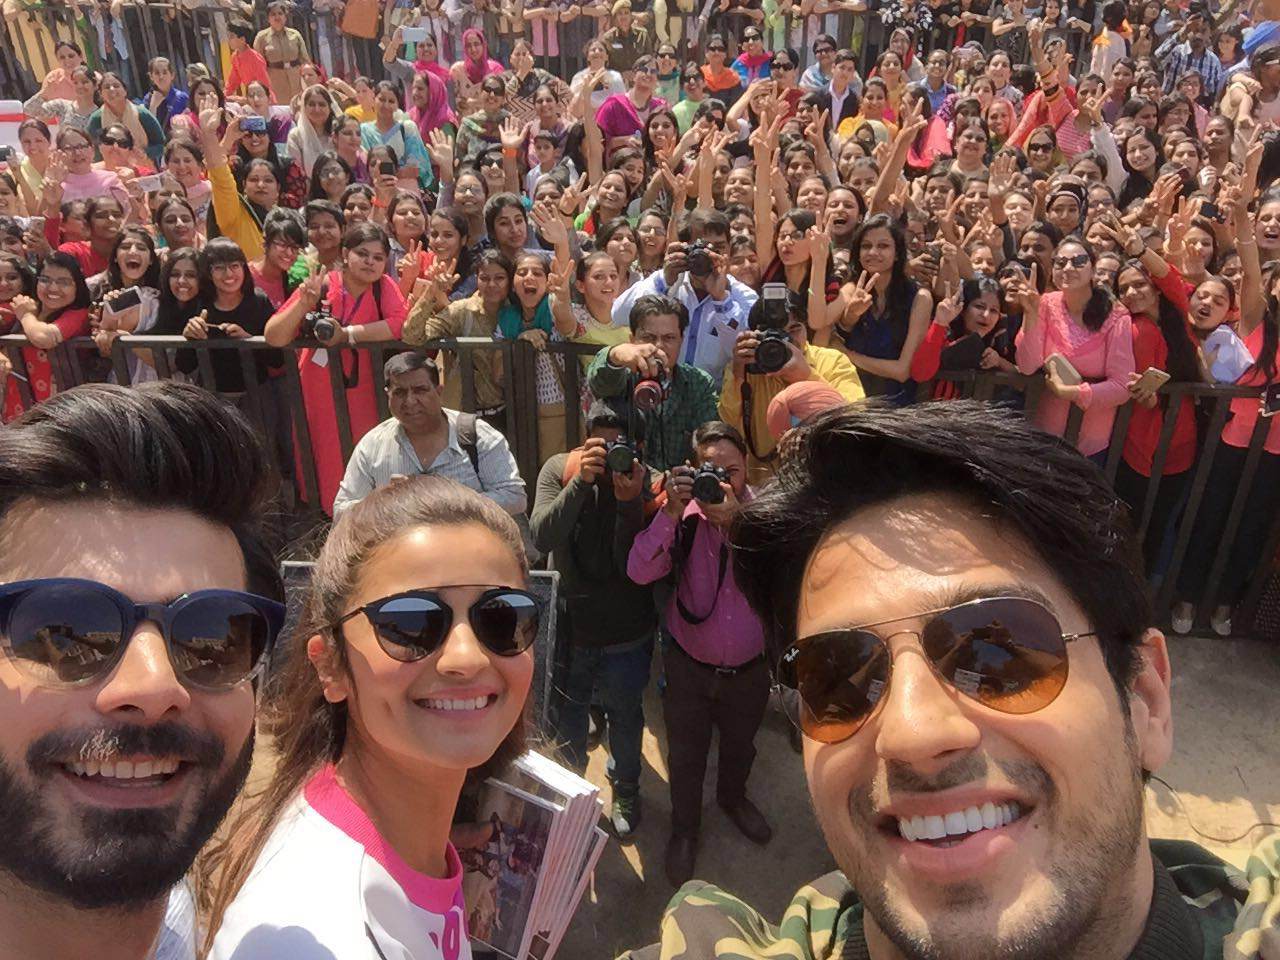 Sidharth Malhotra, Fawad Khan and Alia Bhatt promote Kapoor and Sons at a college in Chandigarh